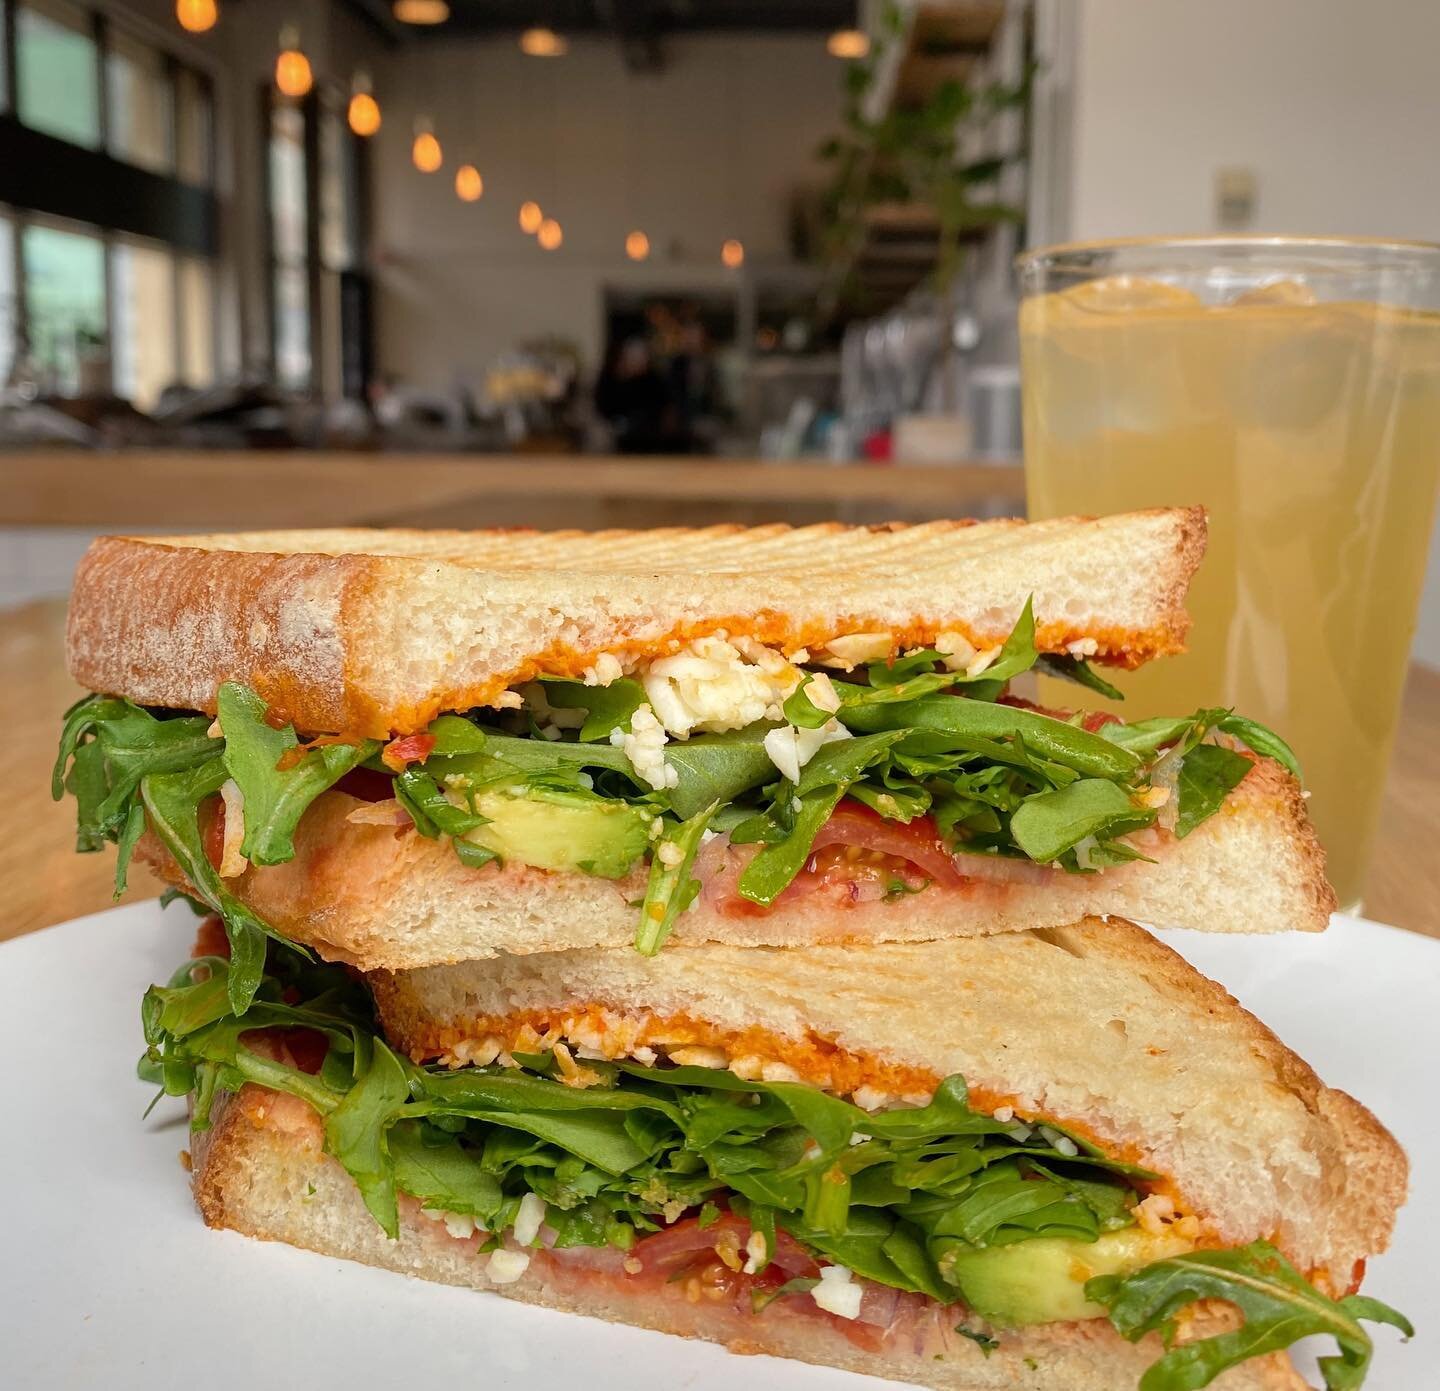 New sandwich added to our menu! The VEGAN California Panini. (Yup 100% vegan, without having to modify anything!) Plus our Iced Green Tea Lemonade peeping in the back&hellip; It&rsquo;s the perfect spring combo